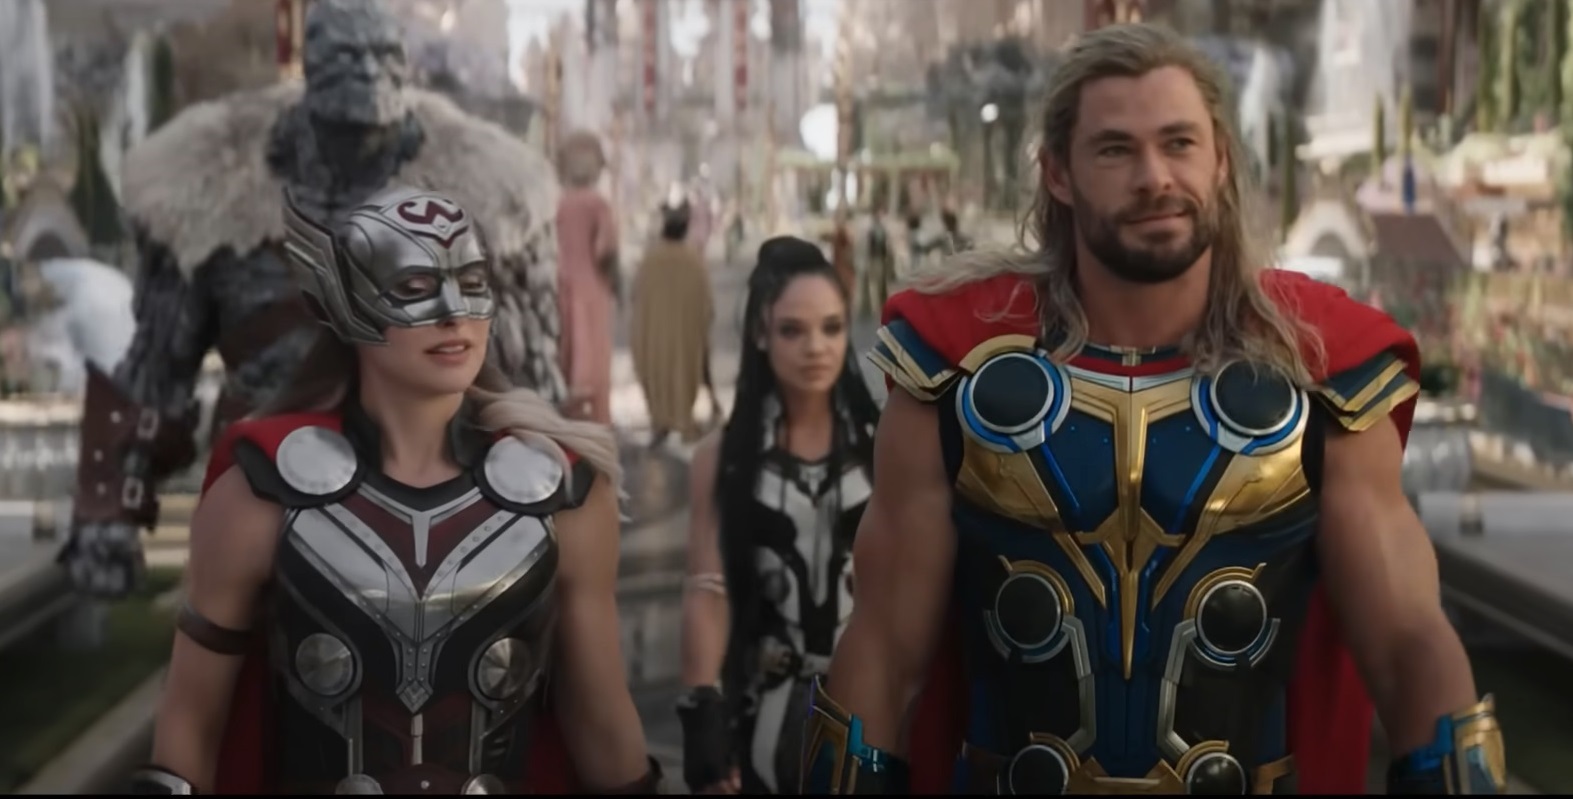 Natalie Portman and Chris Hemsworth in "Thor: Love and Thunder".